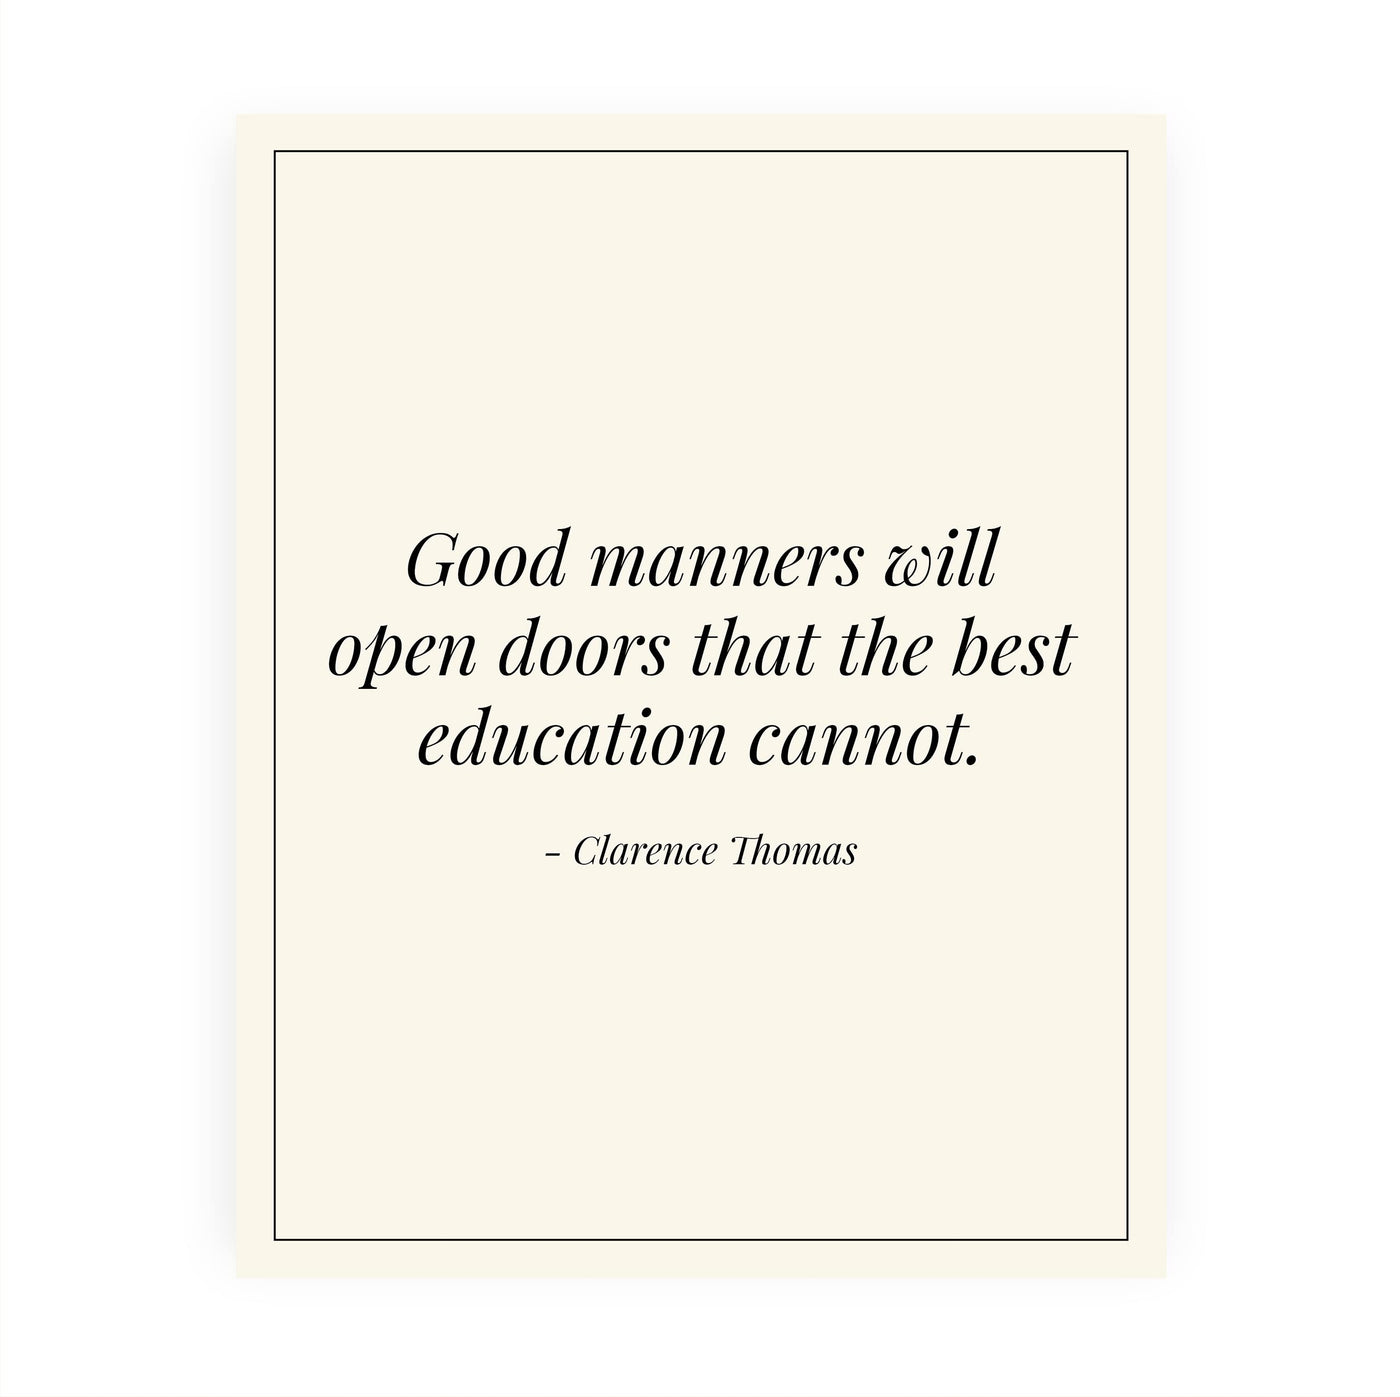 Justice Clarence Thomas Quotes-"Good Manners Will Open Doors" Motivational Supreme Court Quote Wall Decor -8 x 10" Typographic Art Print -Ready to Frame. Great Home-Office-School-Dorm-Library Decor.